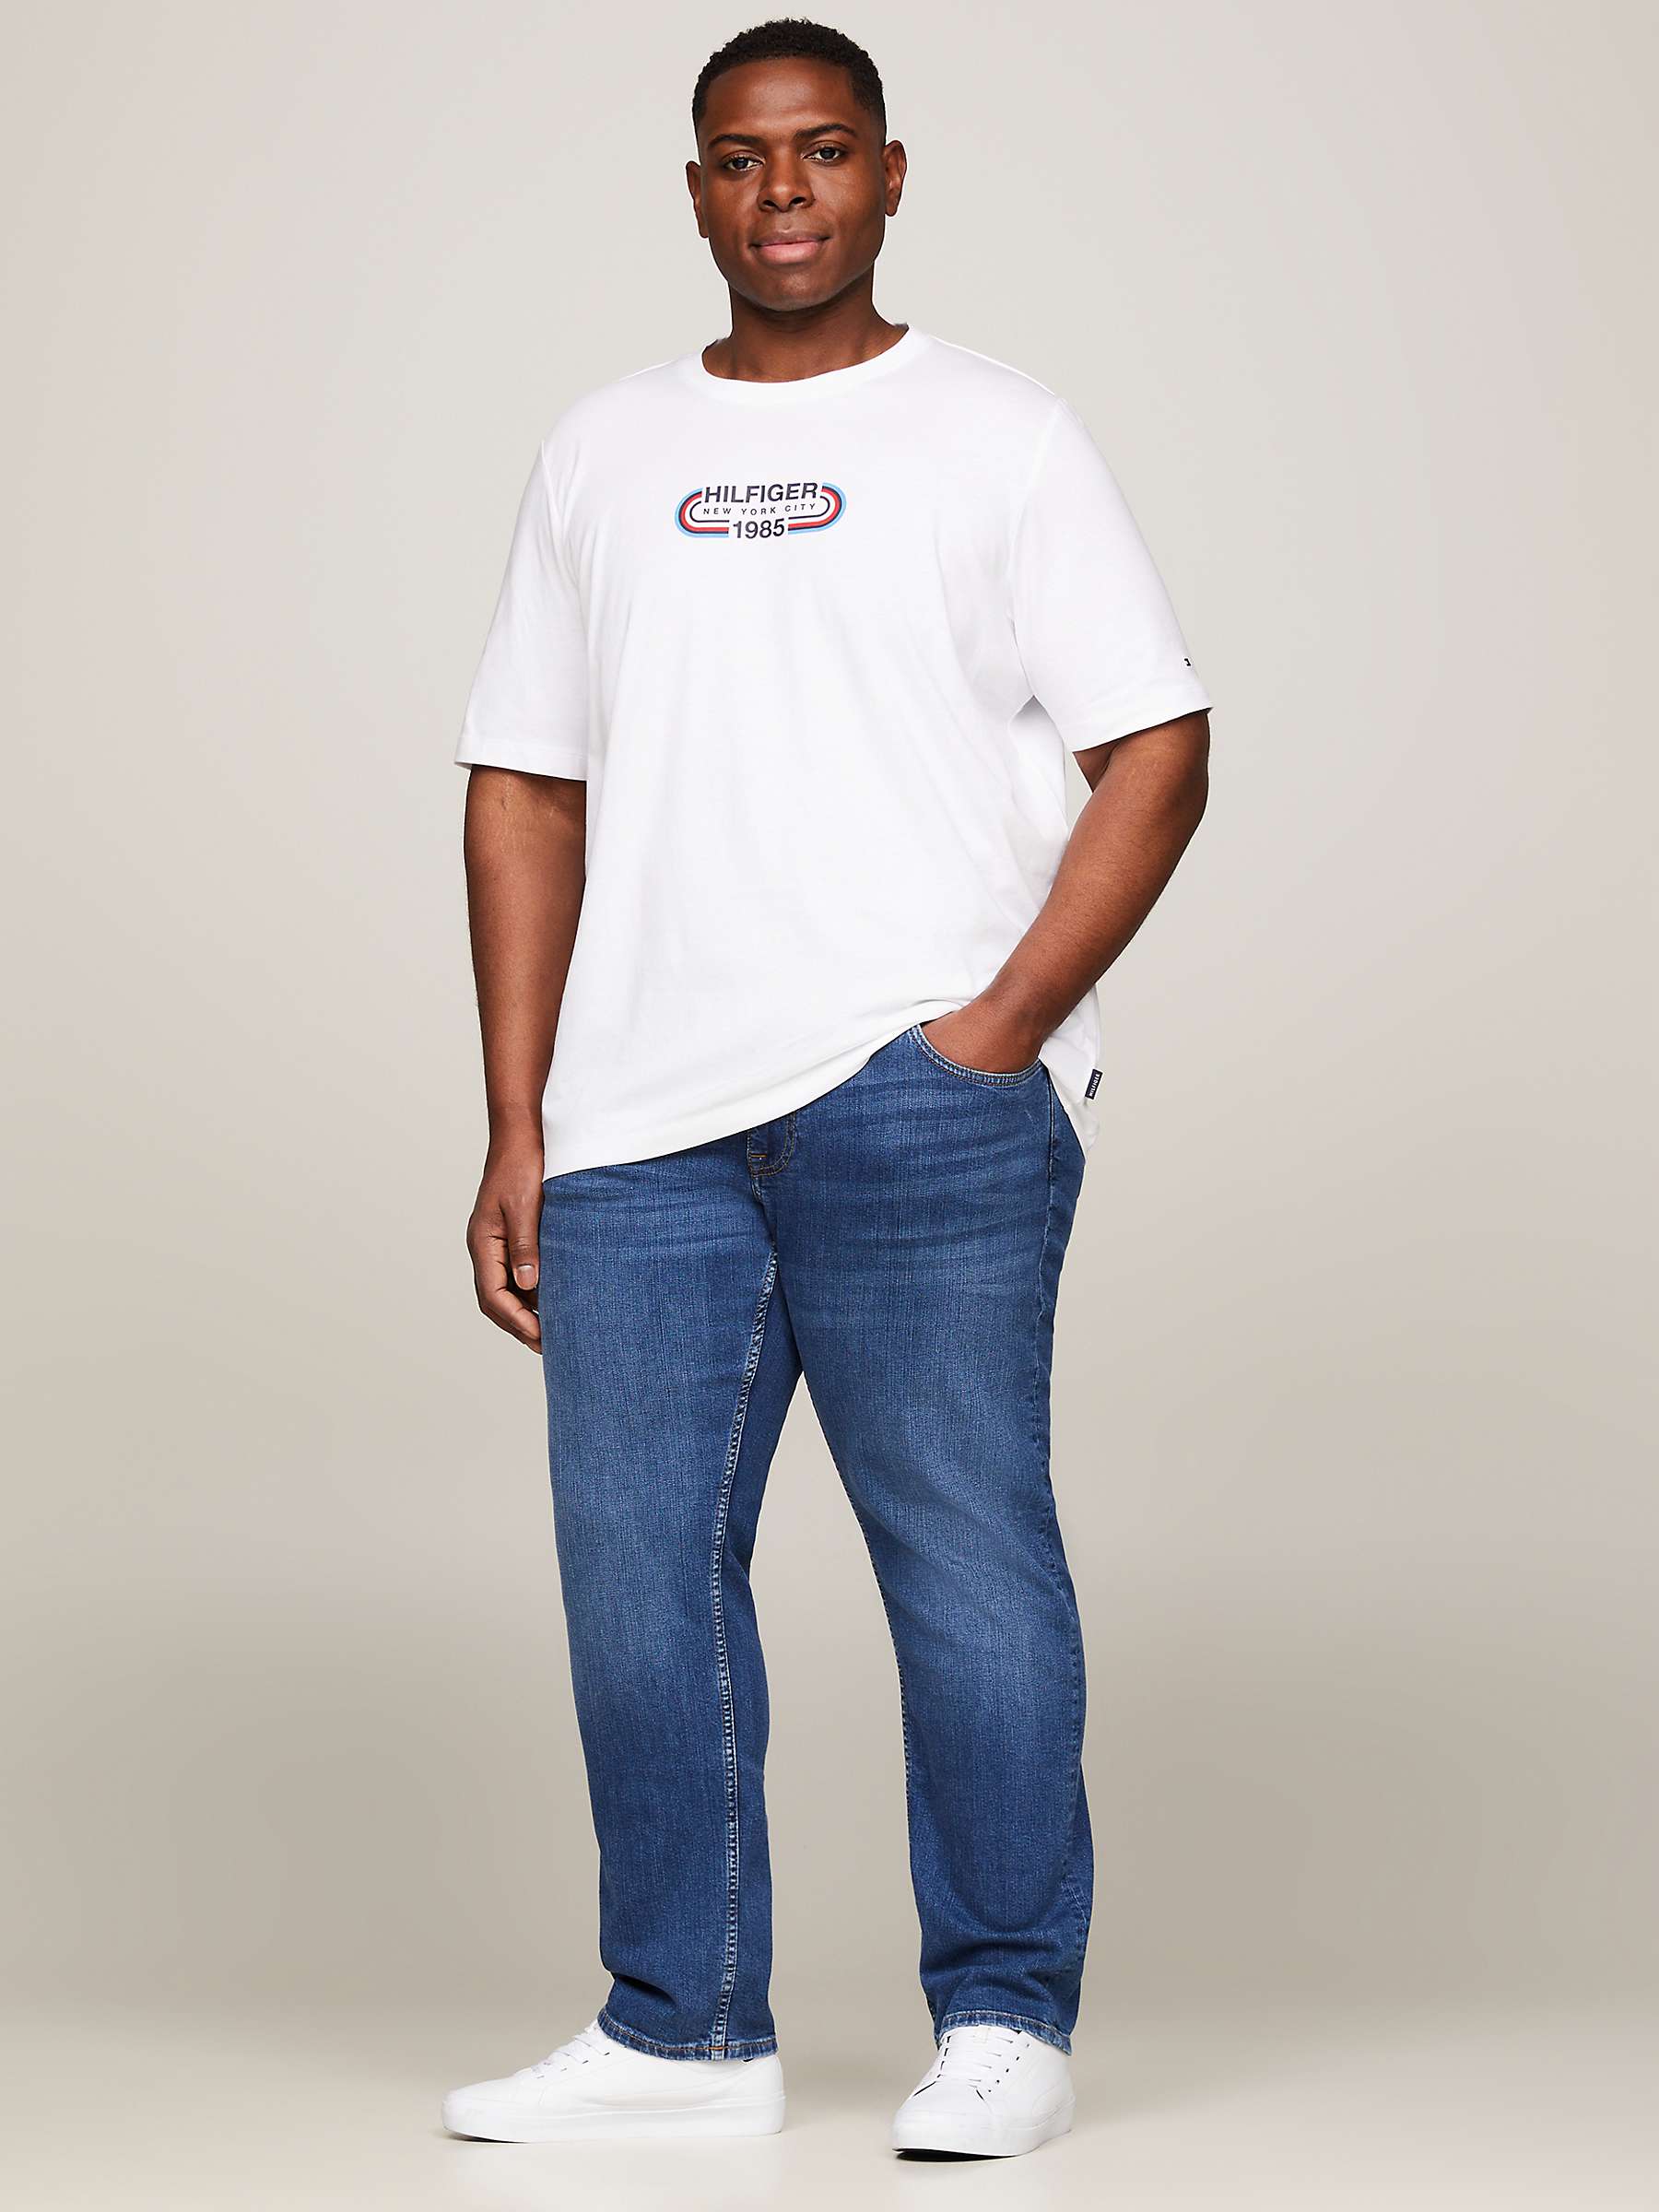 Buy Tommy Hilfiger Big & Tall Graphic T-Shirt Online at johnlewis.com